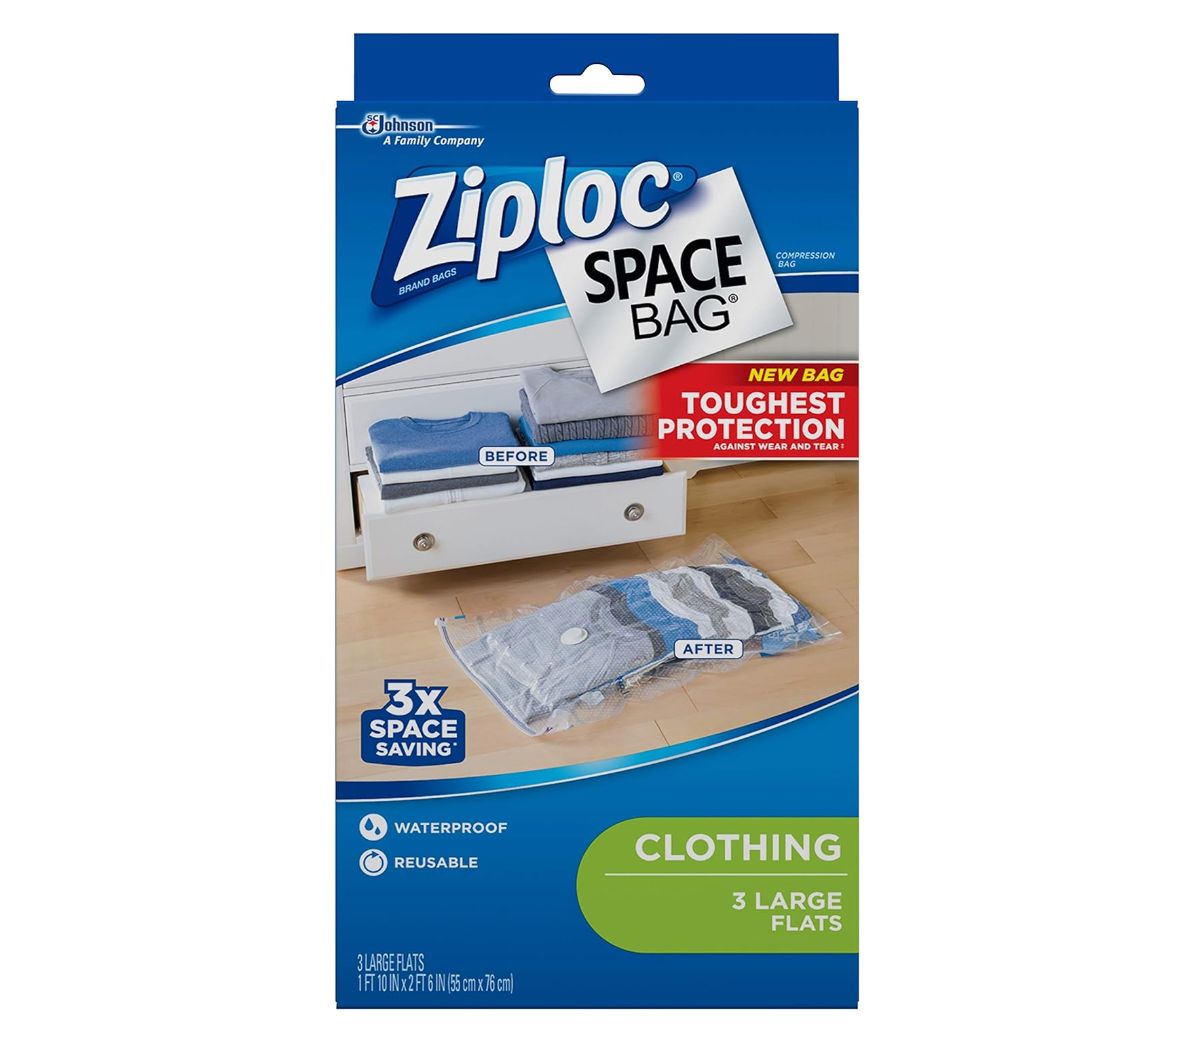 Package of Ziploc Space Bags labeled for clothing with a before and after storage comparison